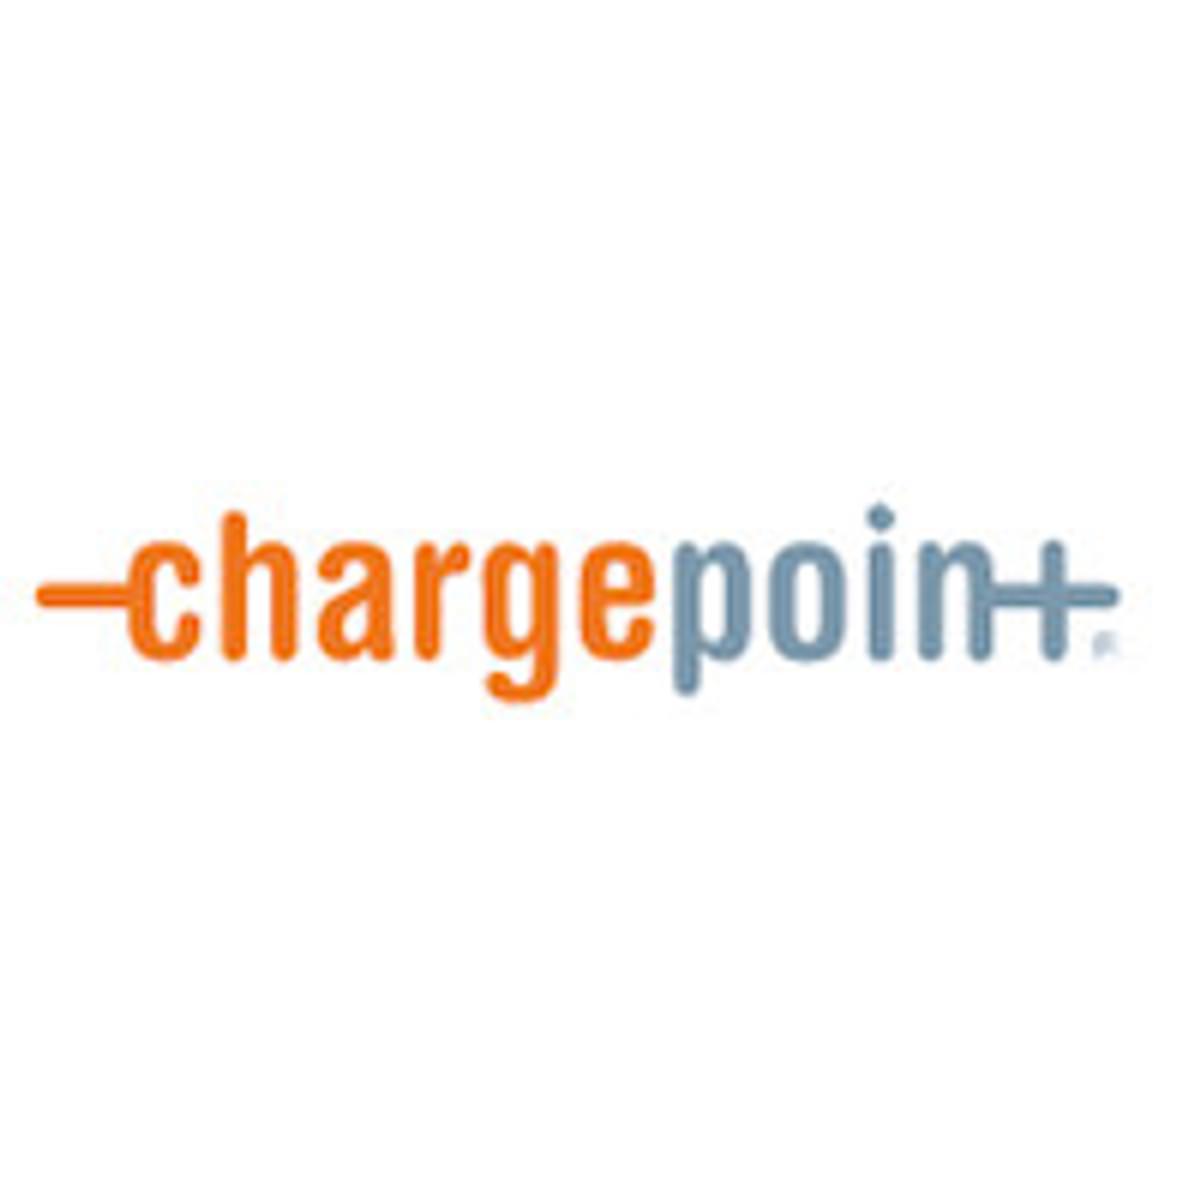 ChargePoint rondt fusie met Switchback af image